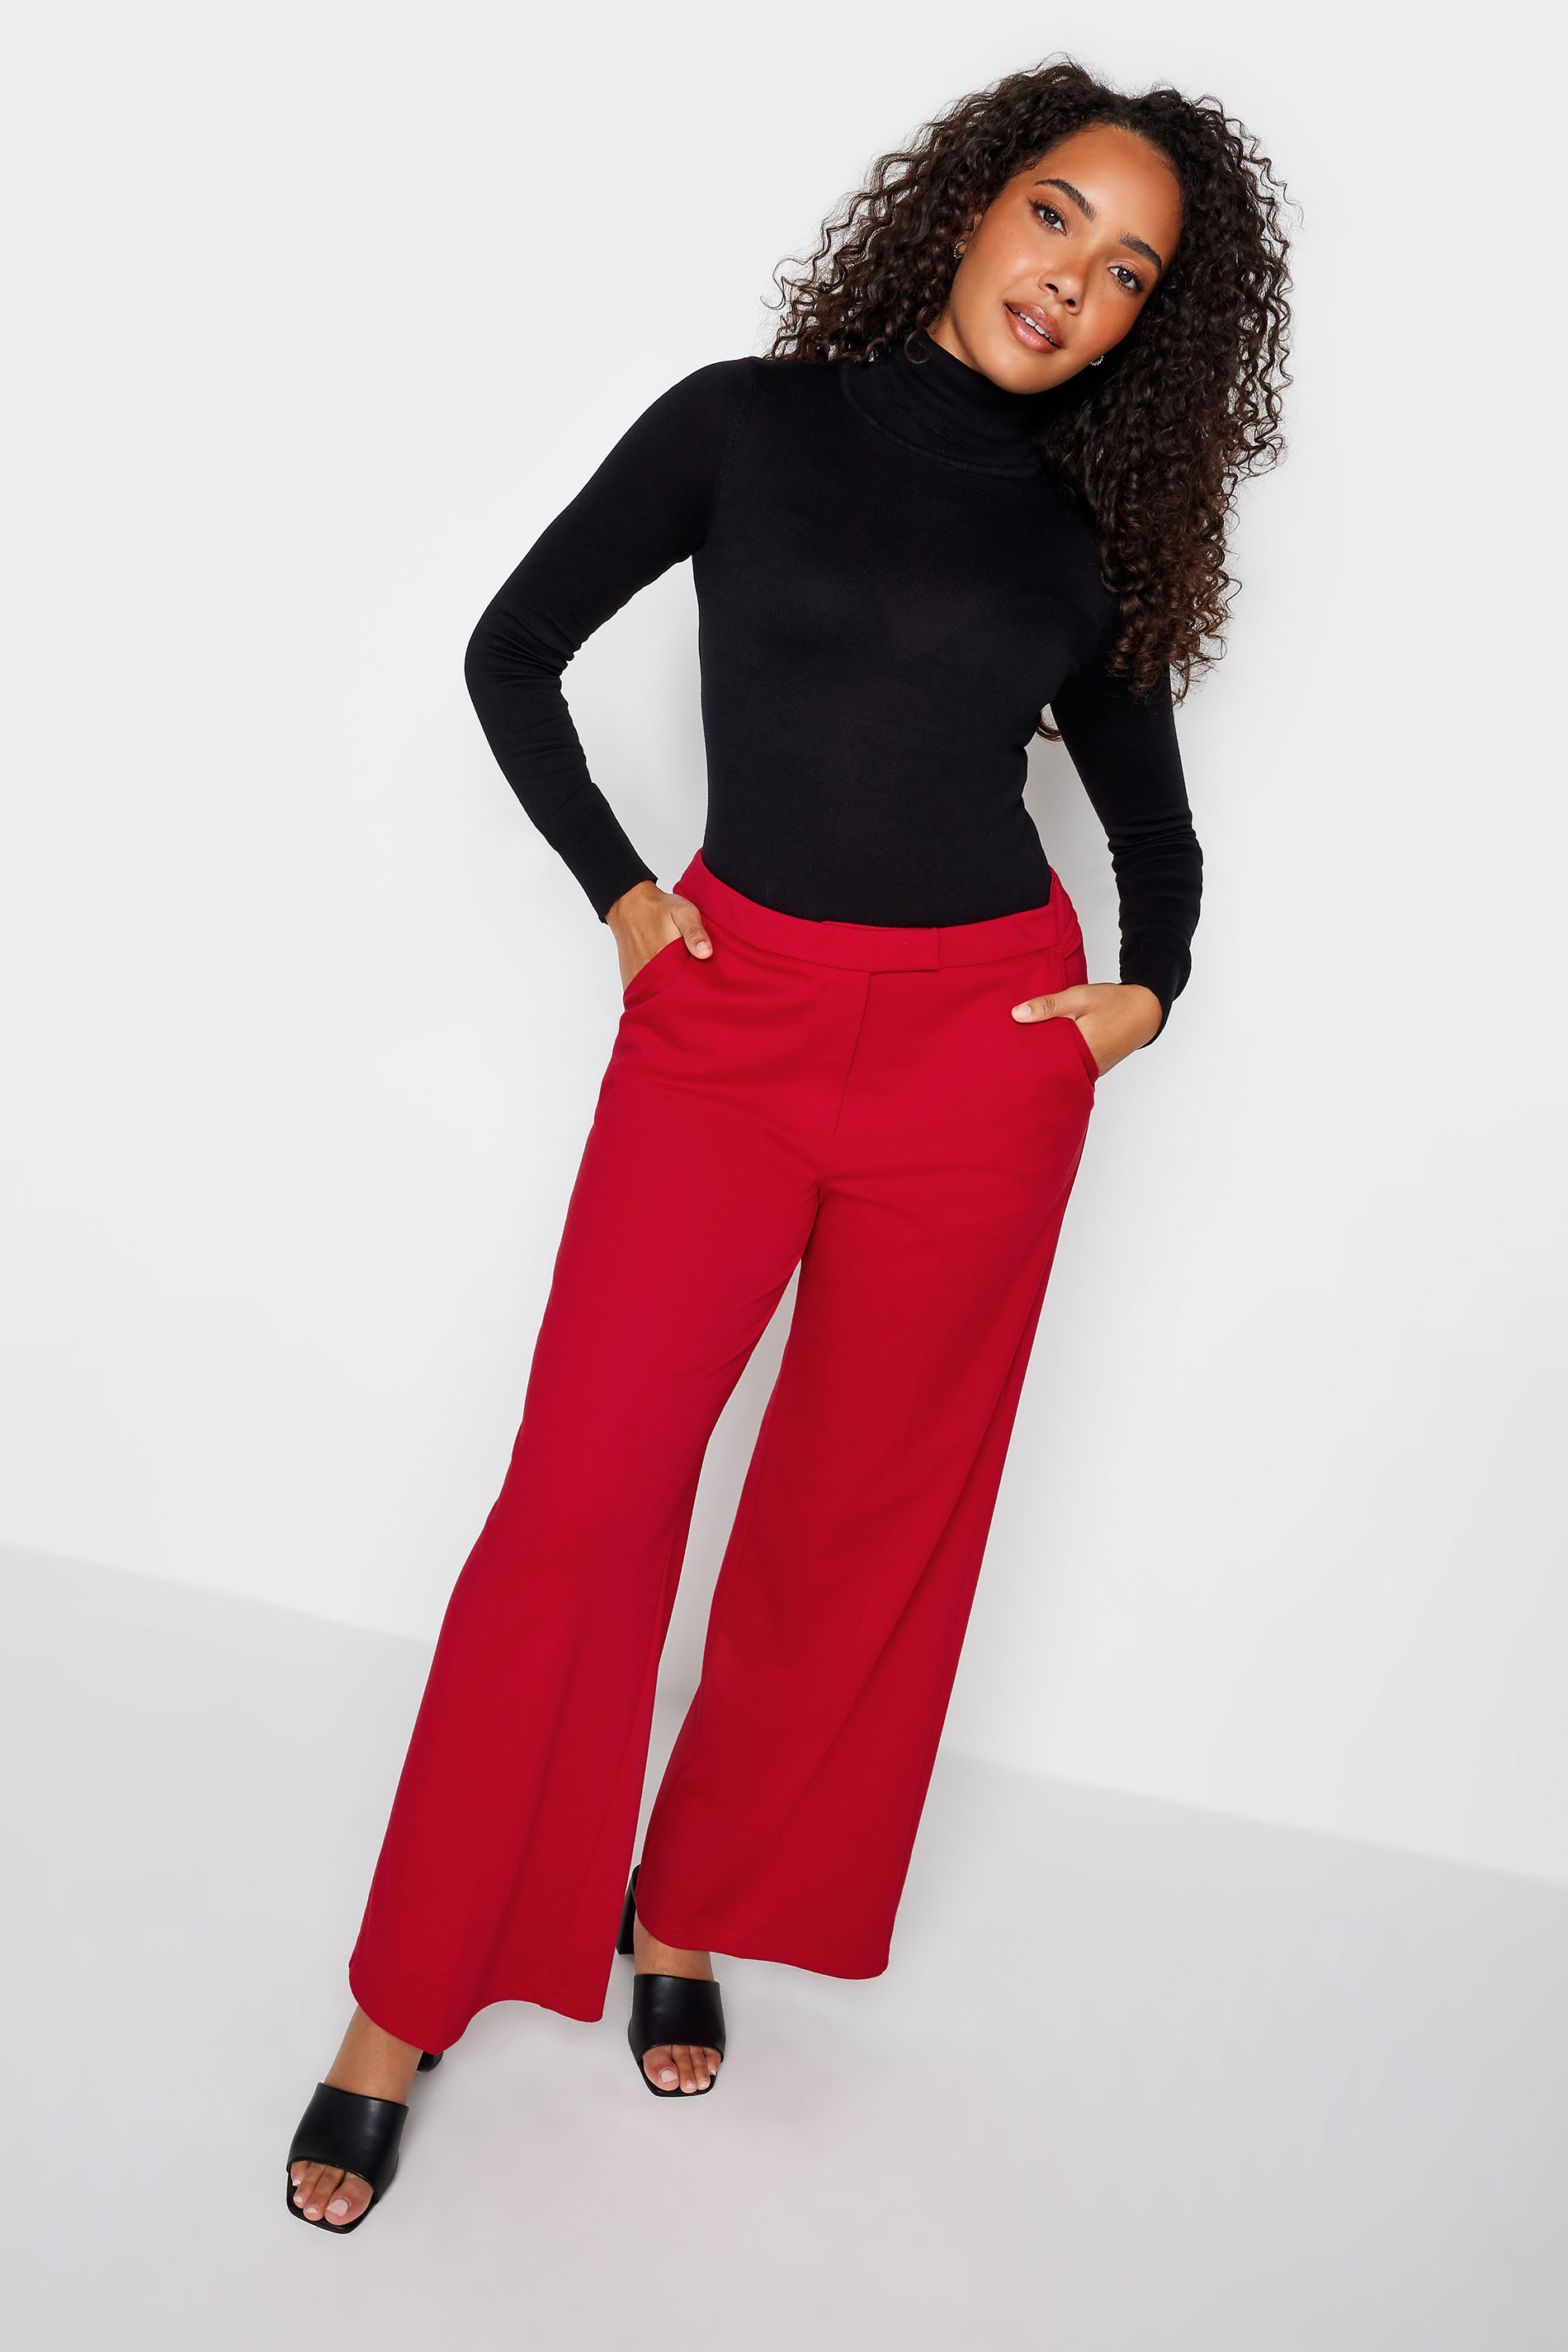 M&Co Red Ponte Wide Leg Trousers | M&Co 2